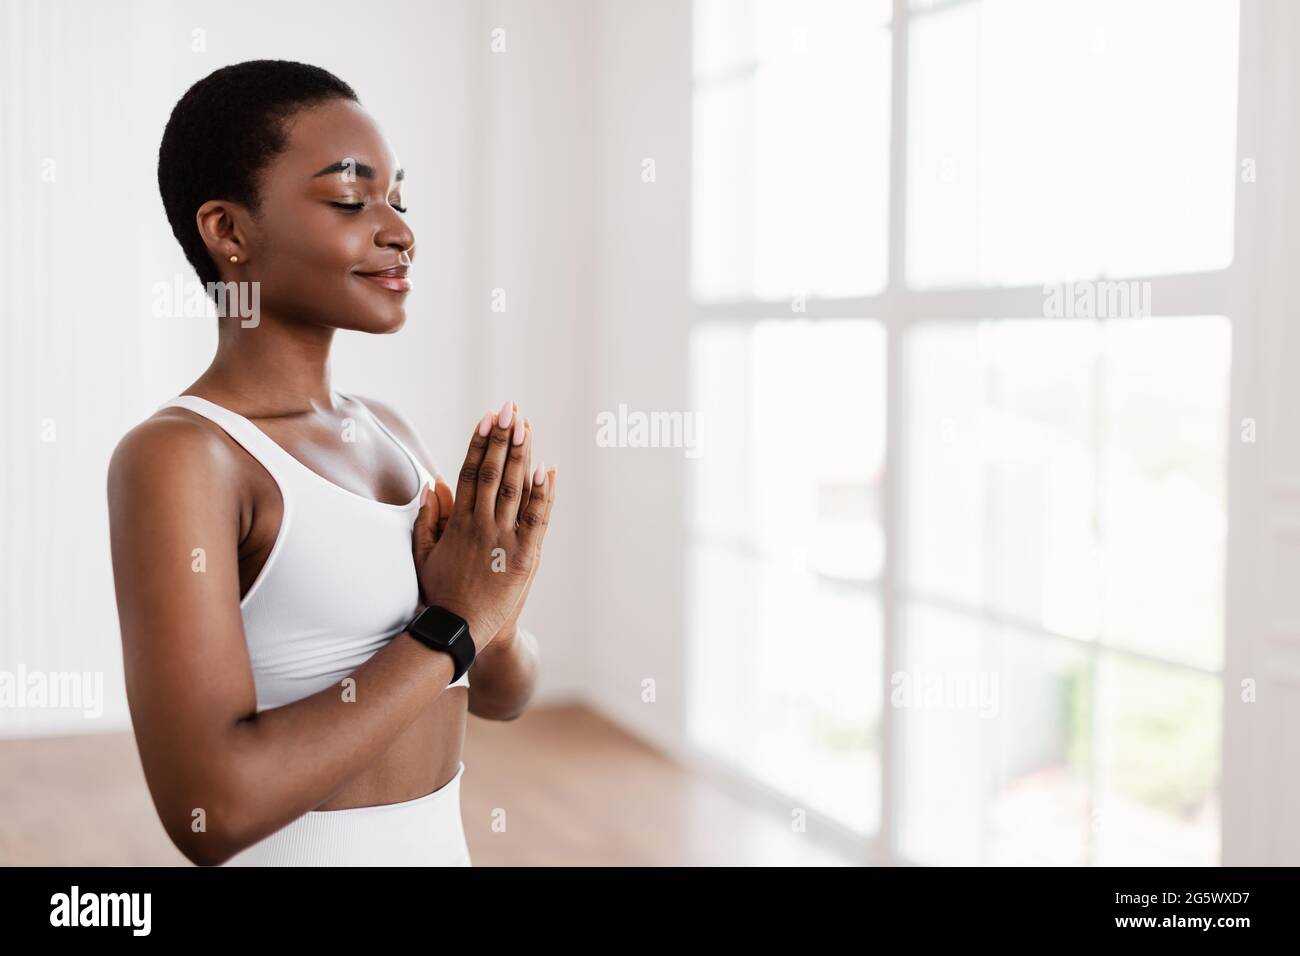 Black lady meditating keeping hands together in prayer pose Stock Photo